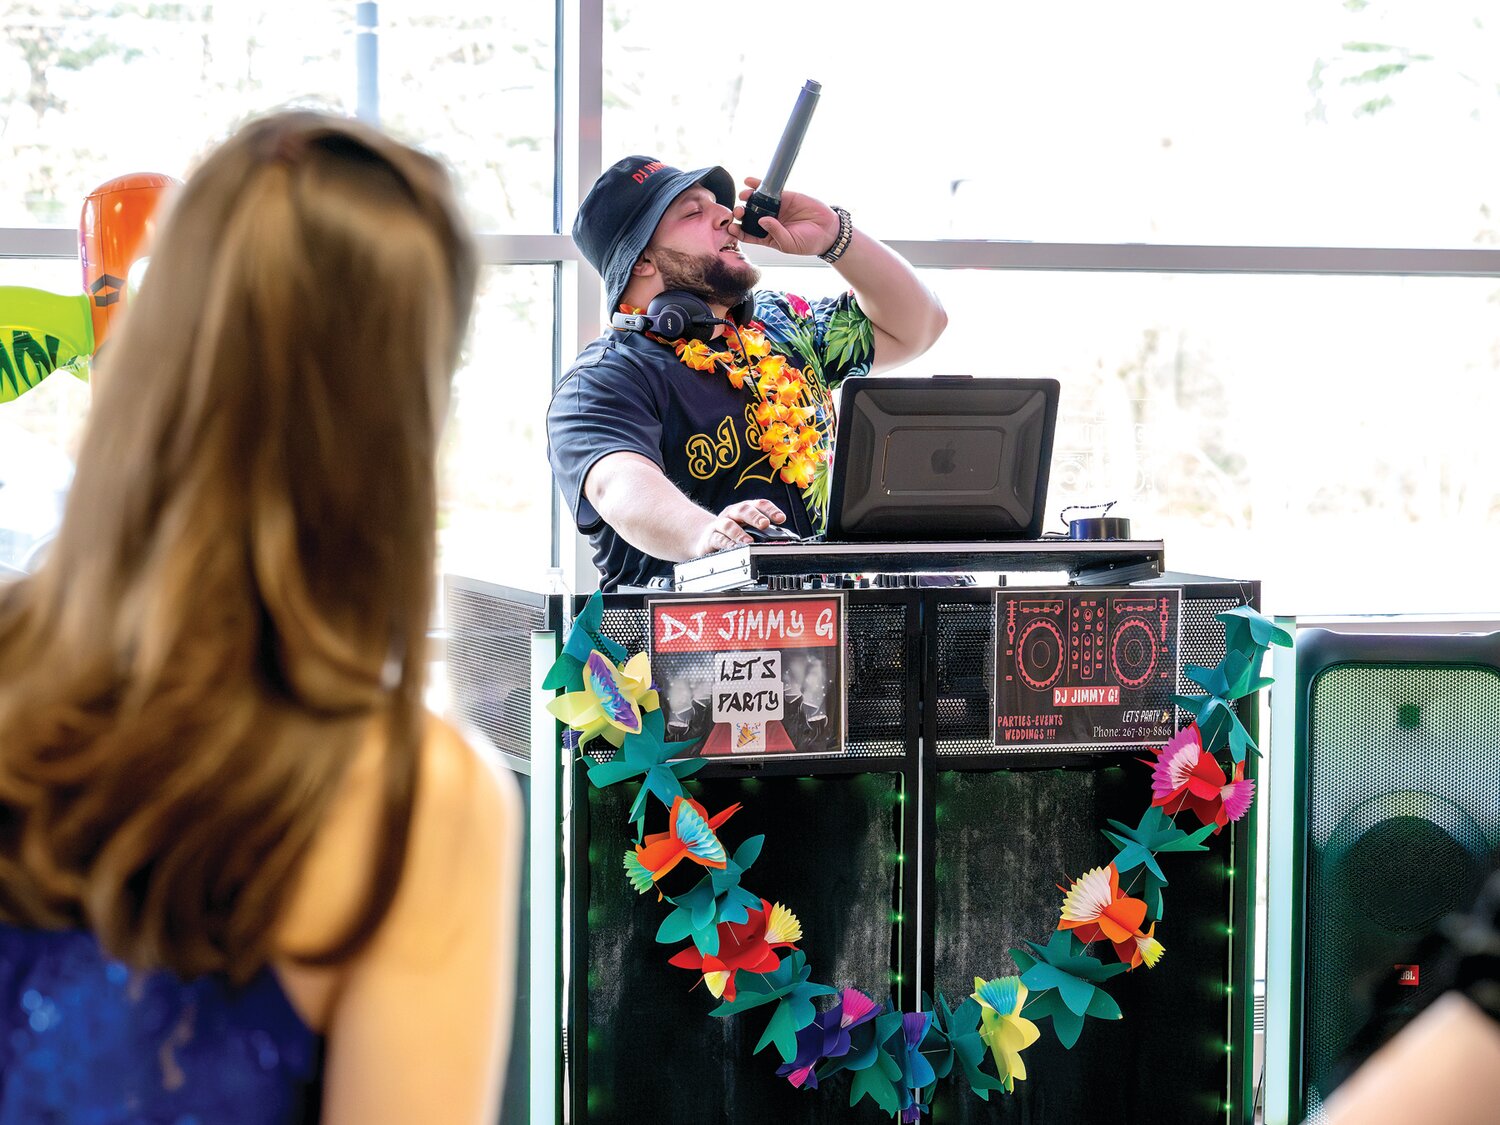 DJ Jimmy G (Jim Gallo) played tunes that kept students and parents on their feet and on the dance floor during Central Bucks East High School’s first Unified Prom March 15.